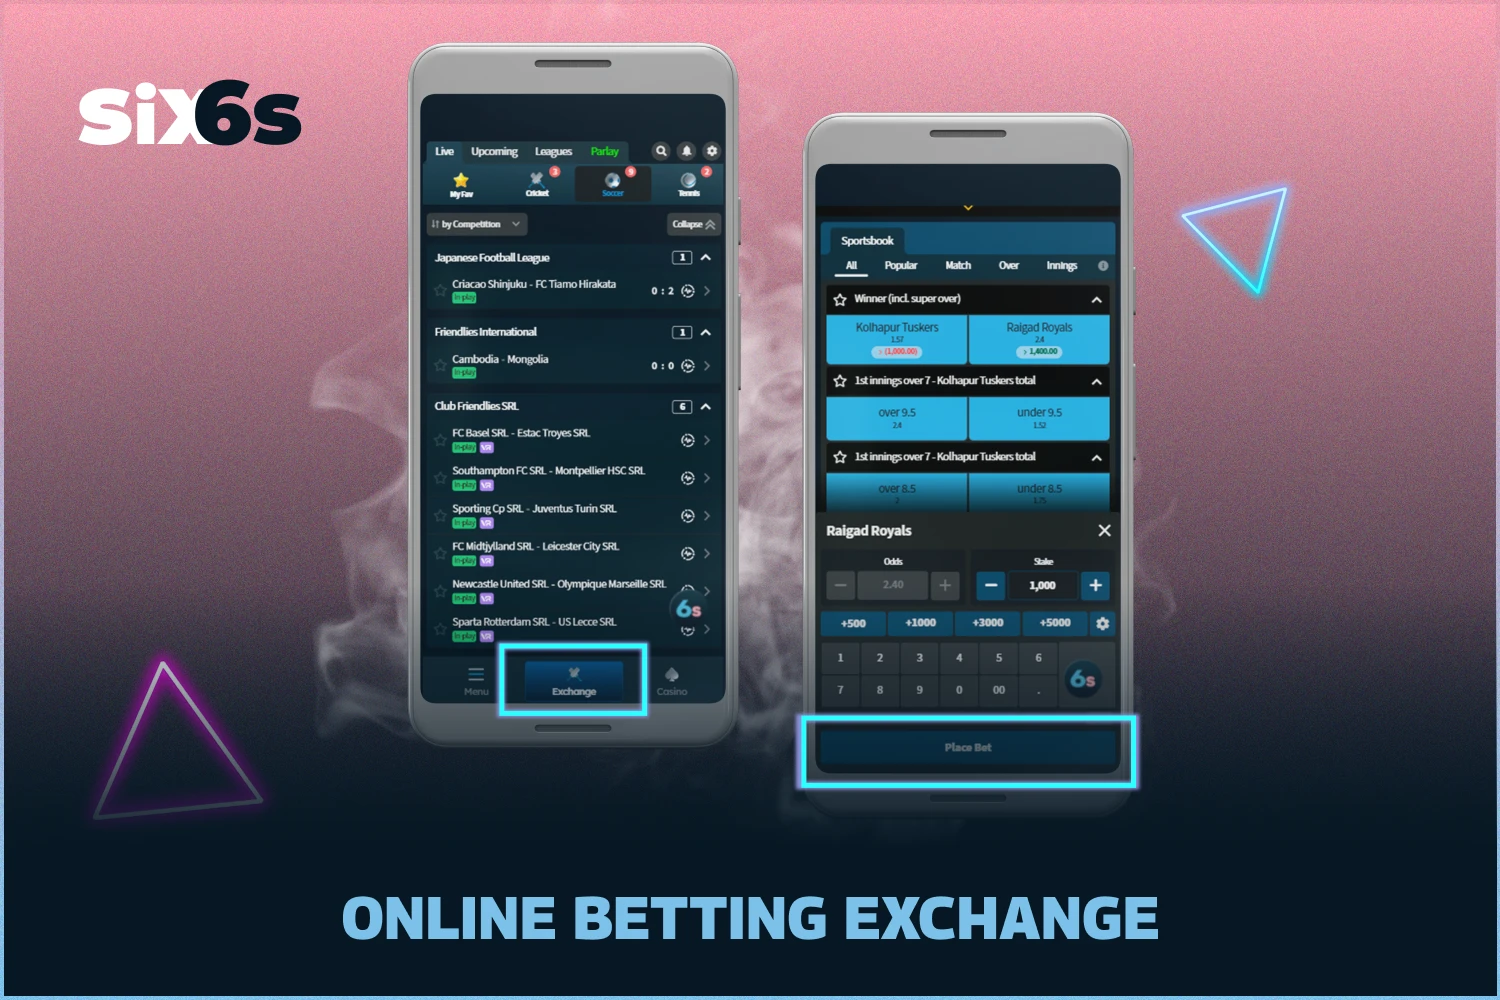 Six6s Bangladesh has its own betting exchange, a type of online betting where the number of available markets and odds are determined by users' bets